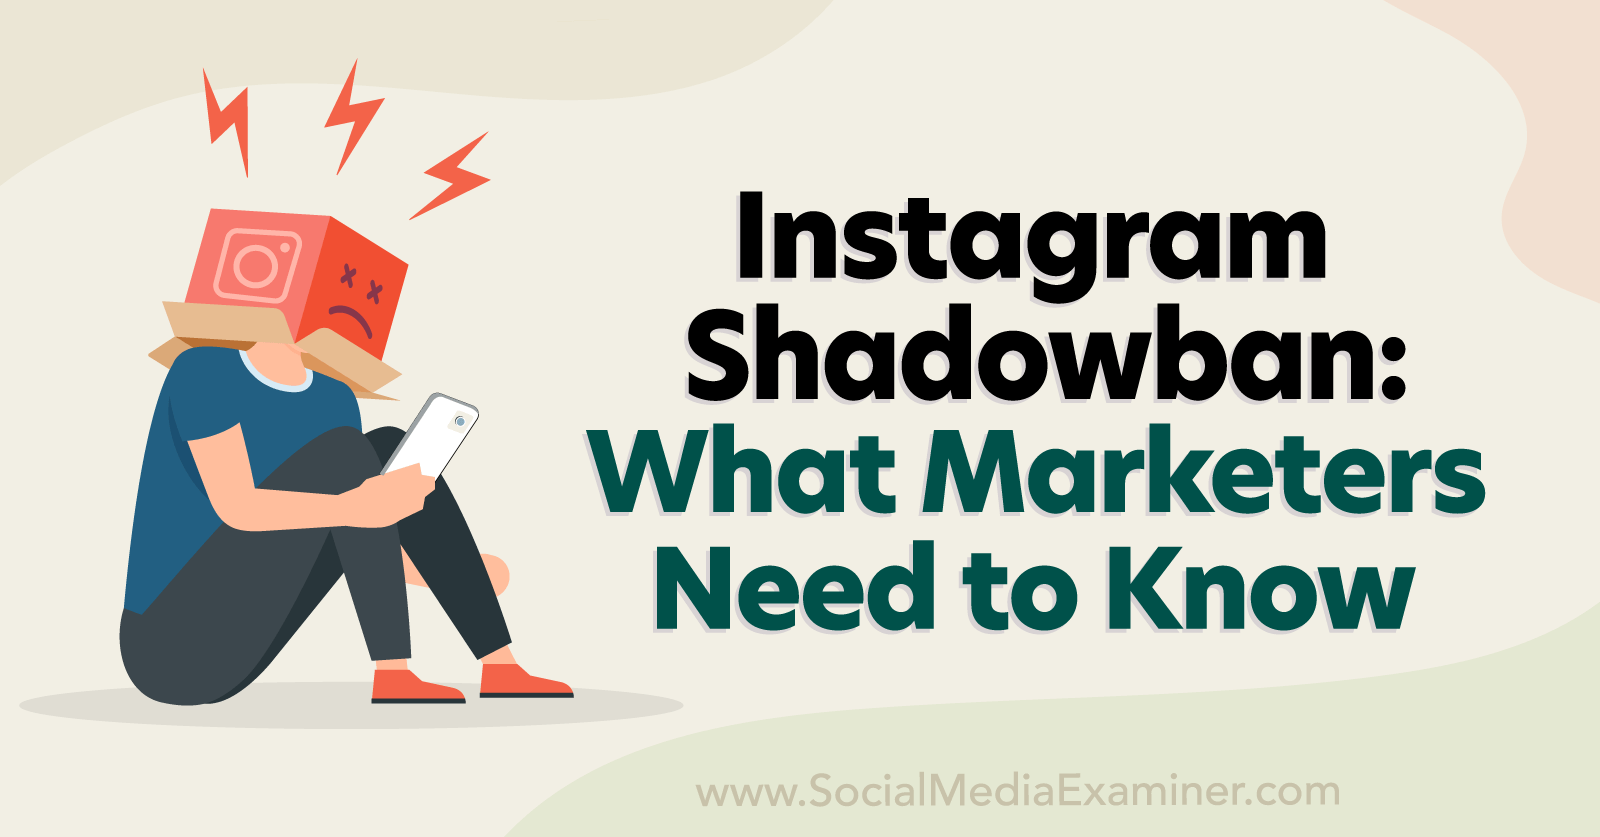 Instagram Shadowban: What Marketers Need to Know on Social Media Examiner